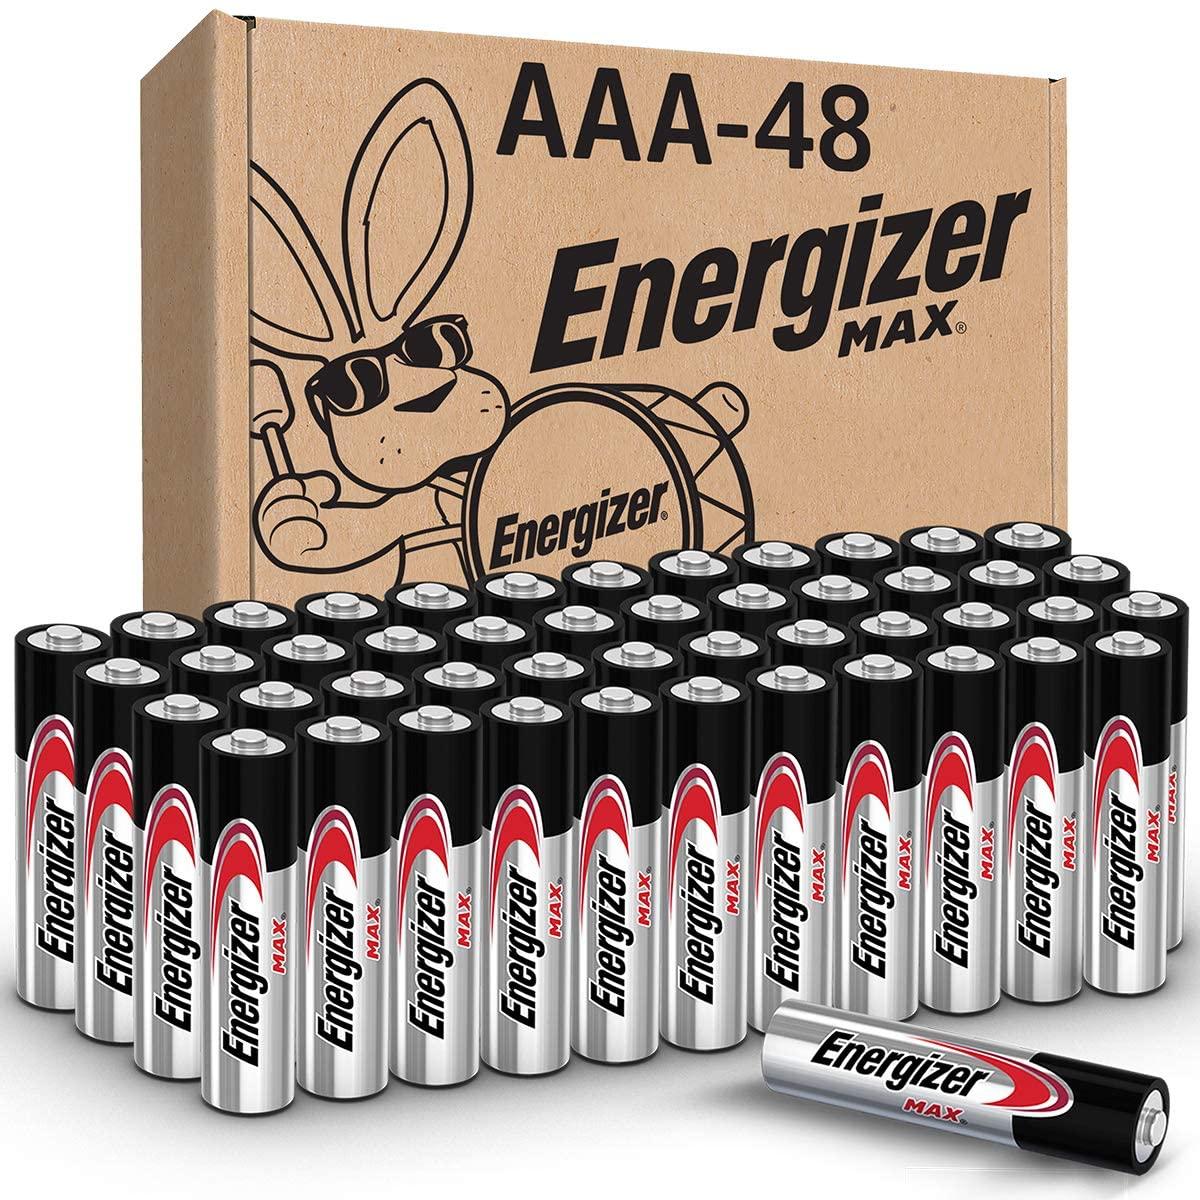 48 Energizer Max AAA Batteries for $13.48 Shipped